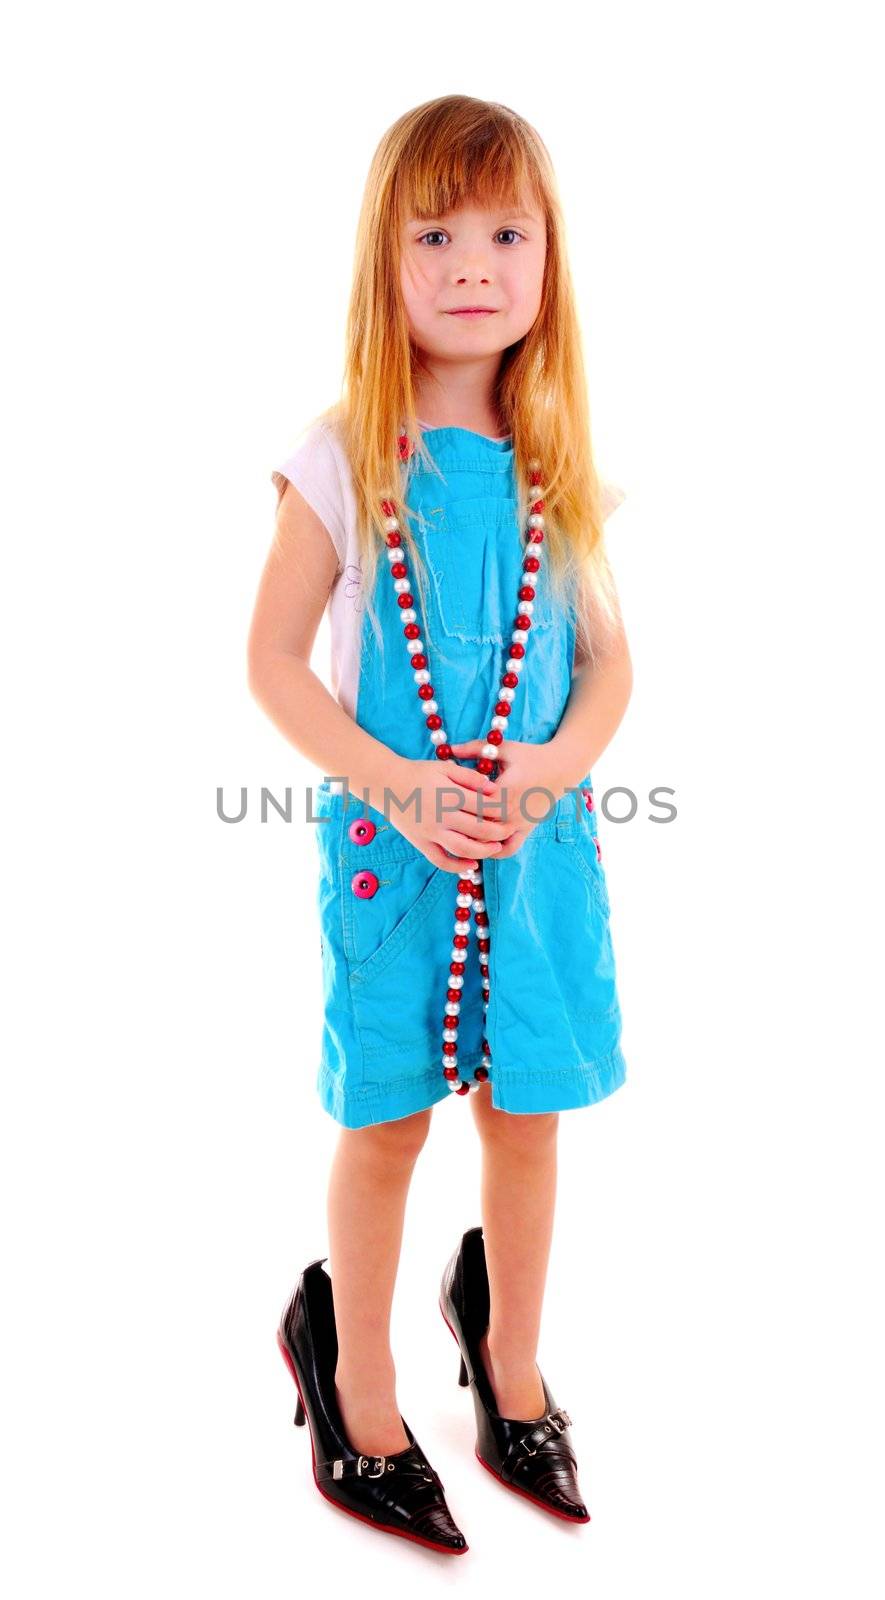 Small blonde girl in mam's high-heeled shoes on white background